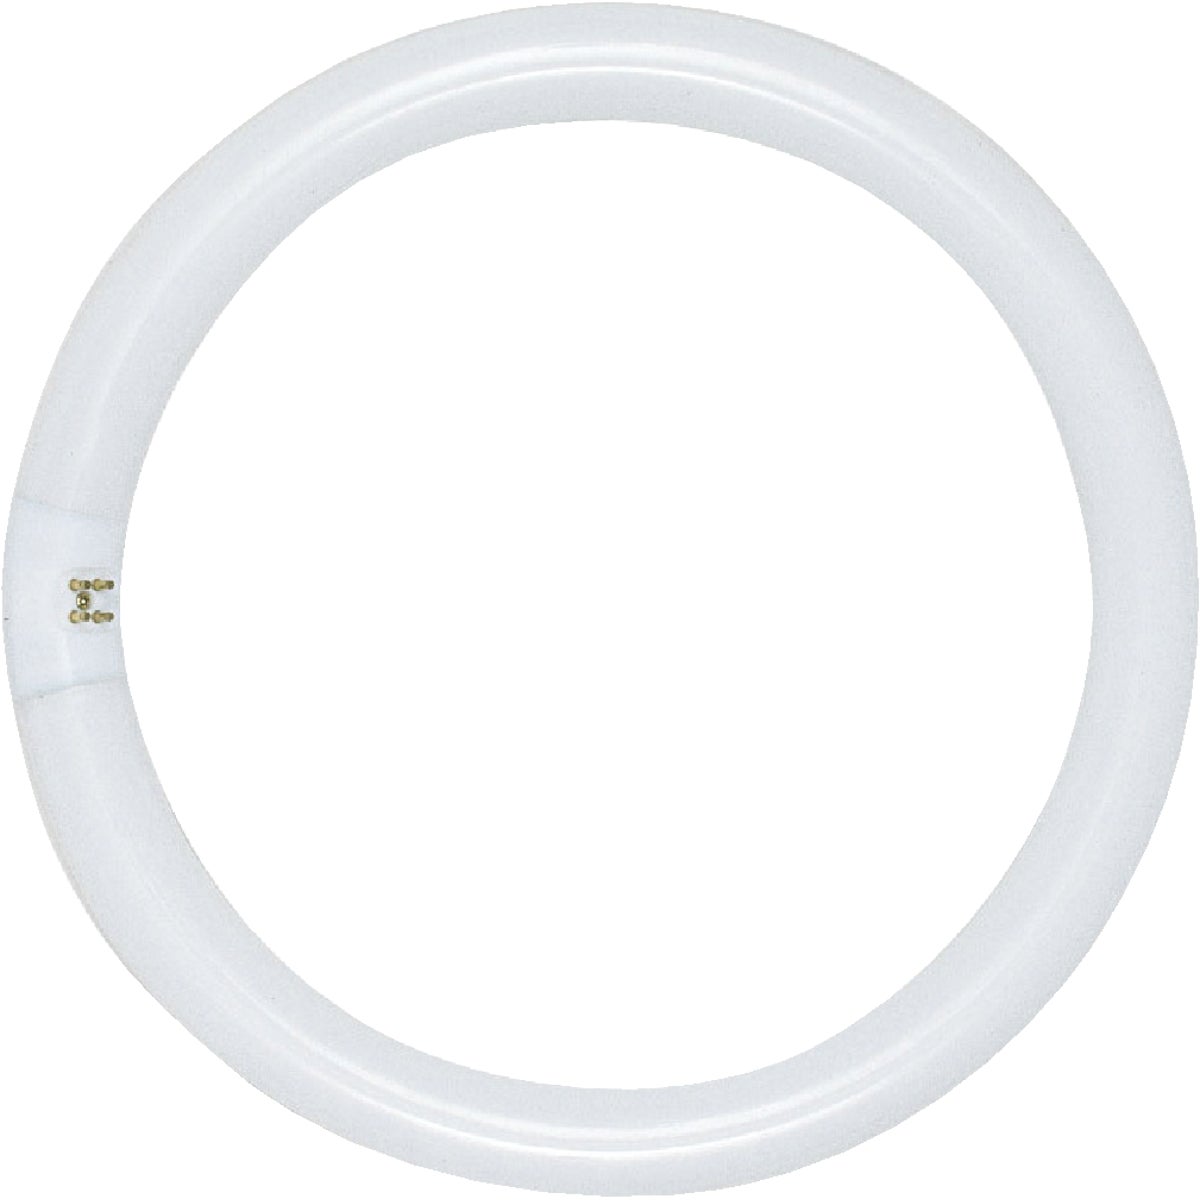 Item 502063, T9 circline fluorescent tube light bulb with 4-pin base.